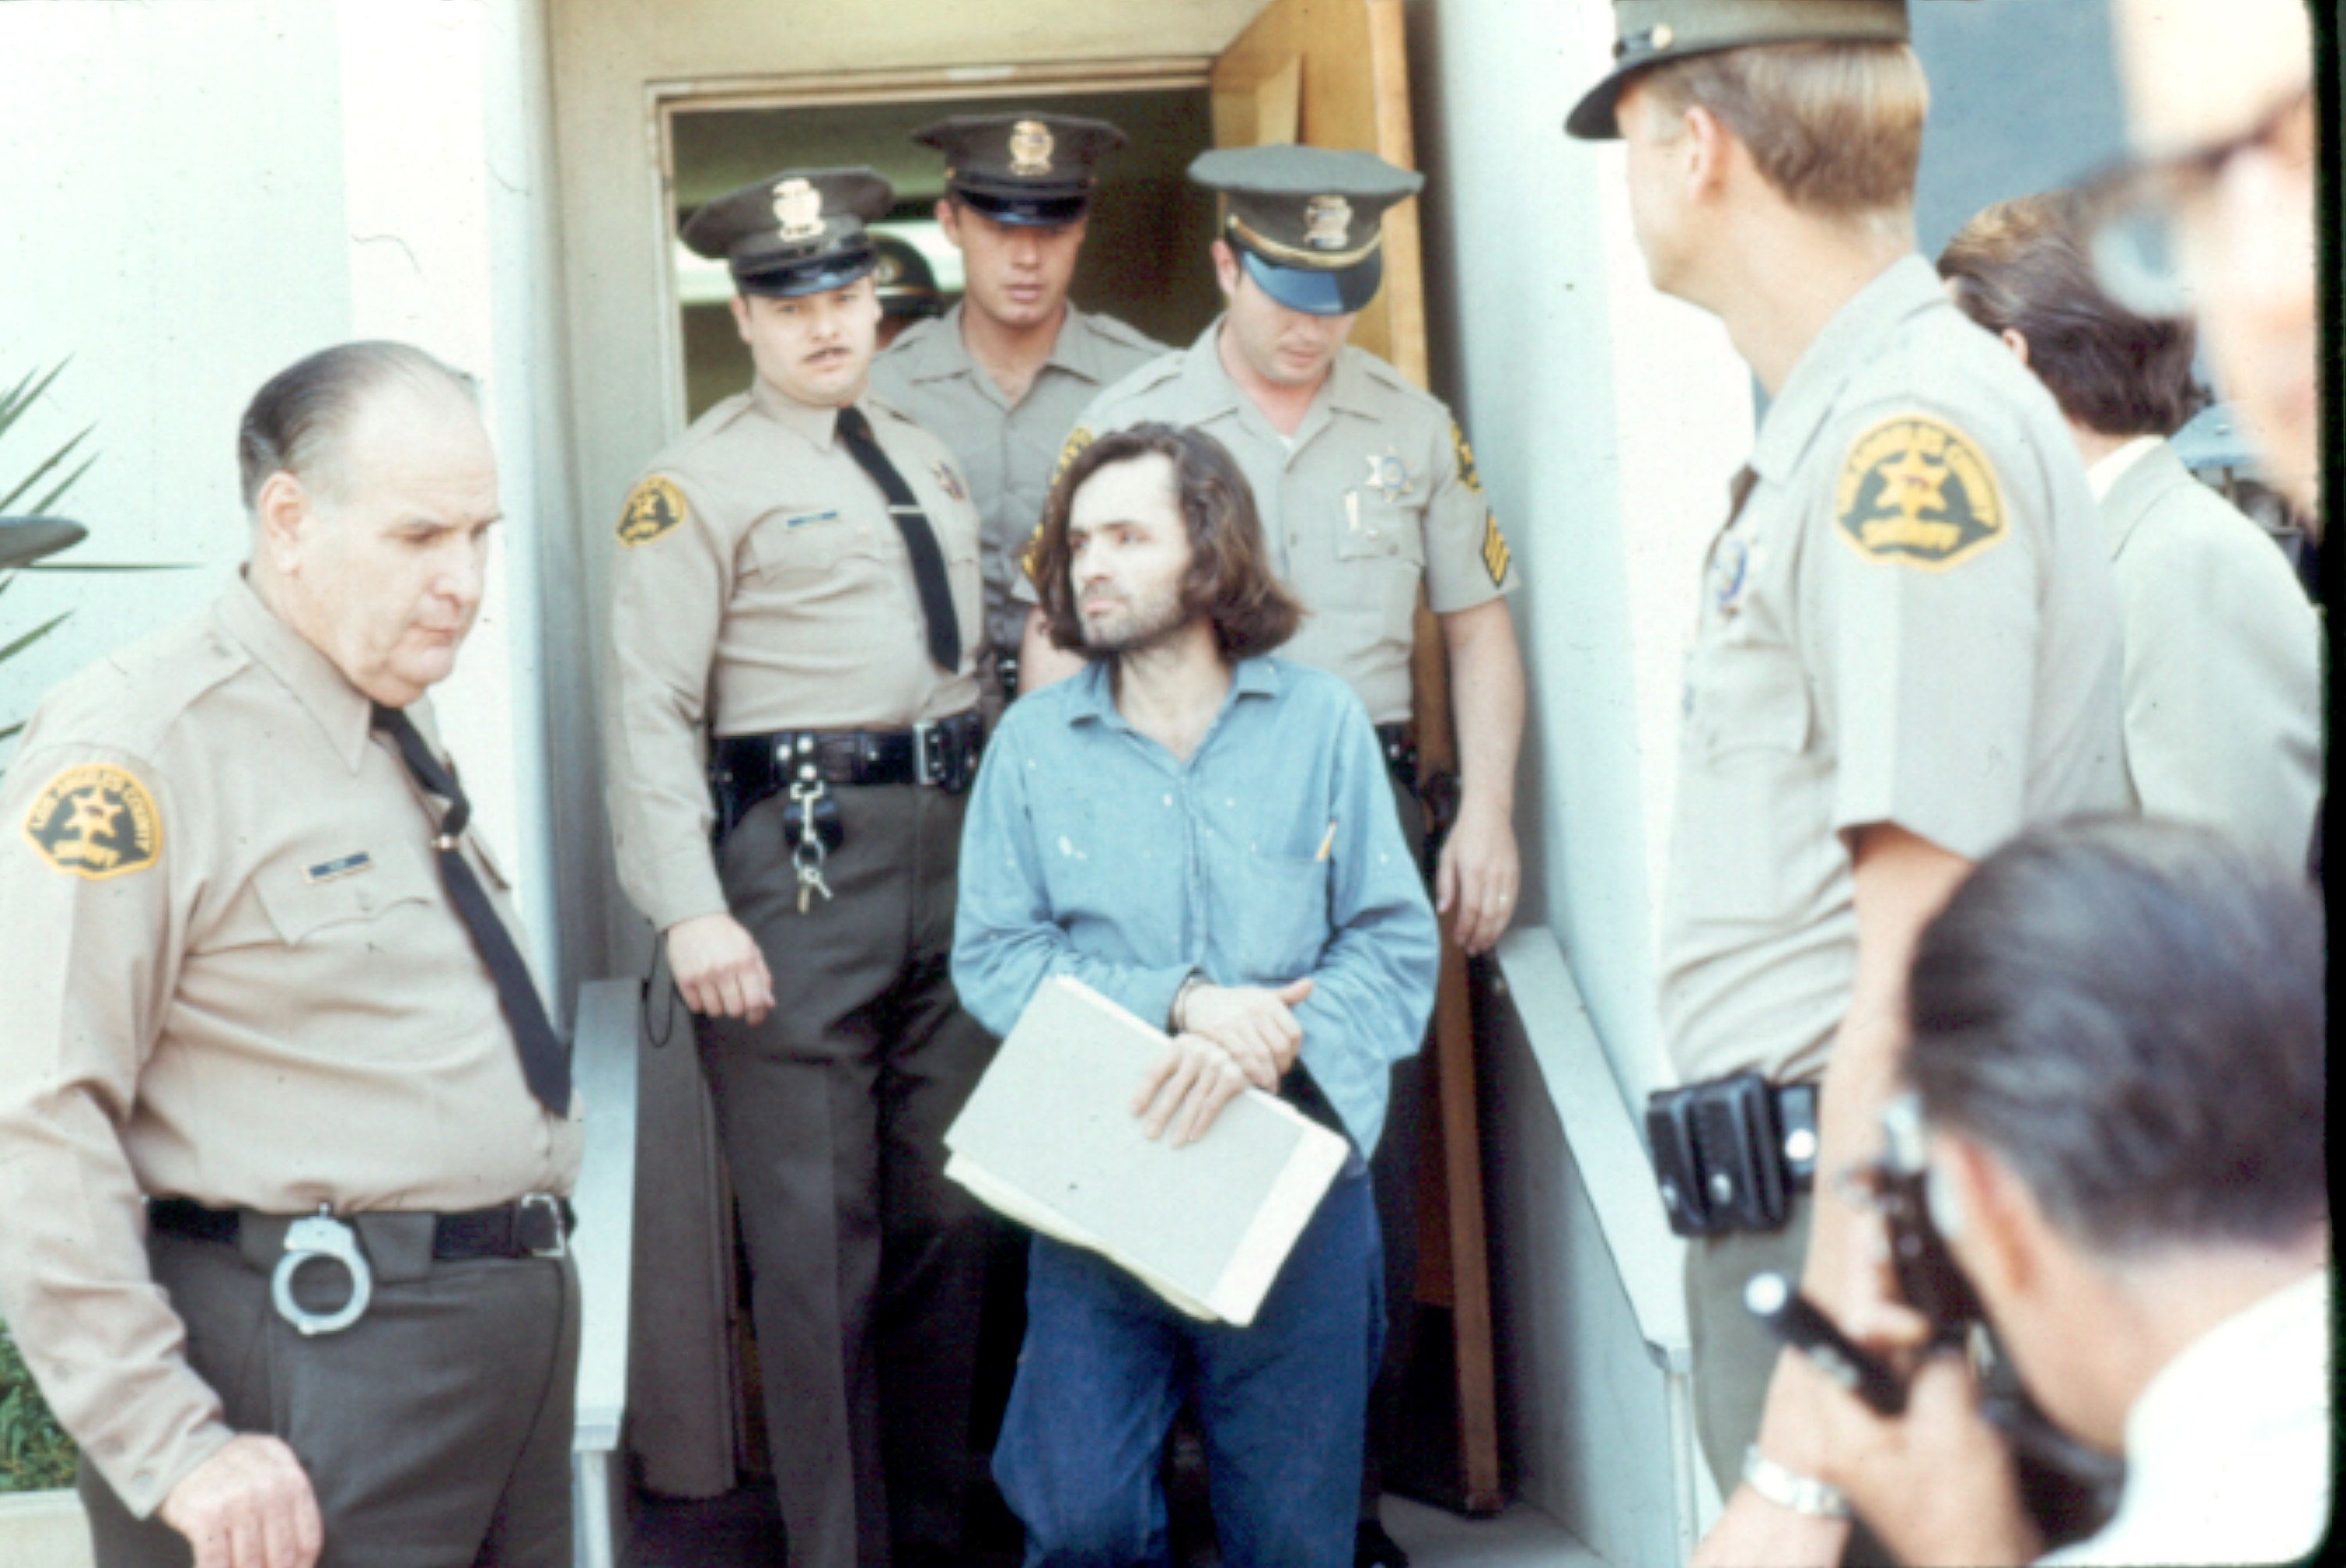 Charles Manson is escorted by several Los Angeles County sheriffs to a police van